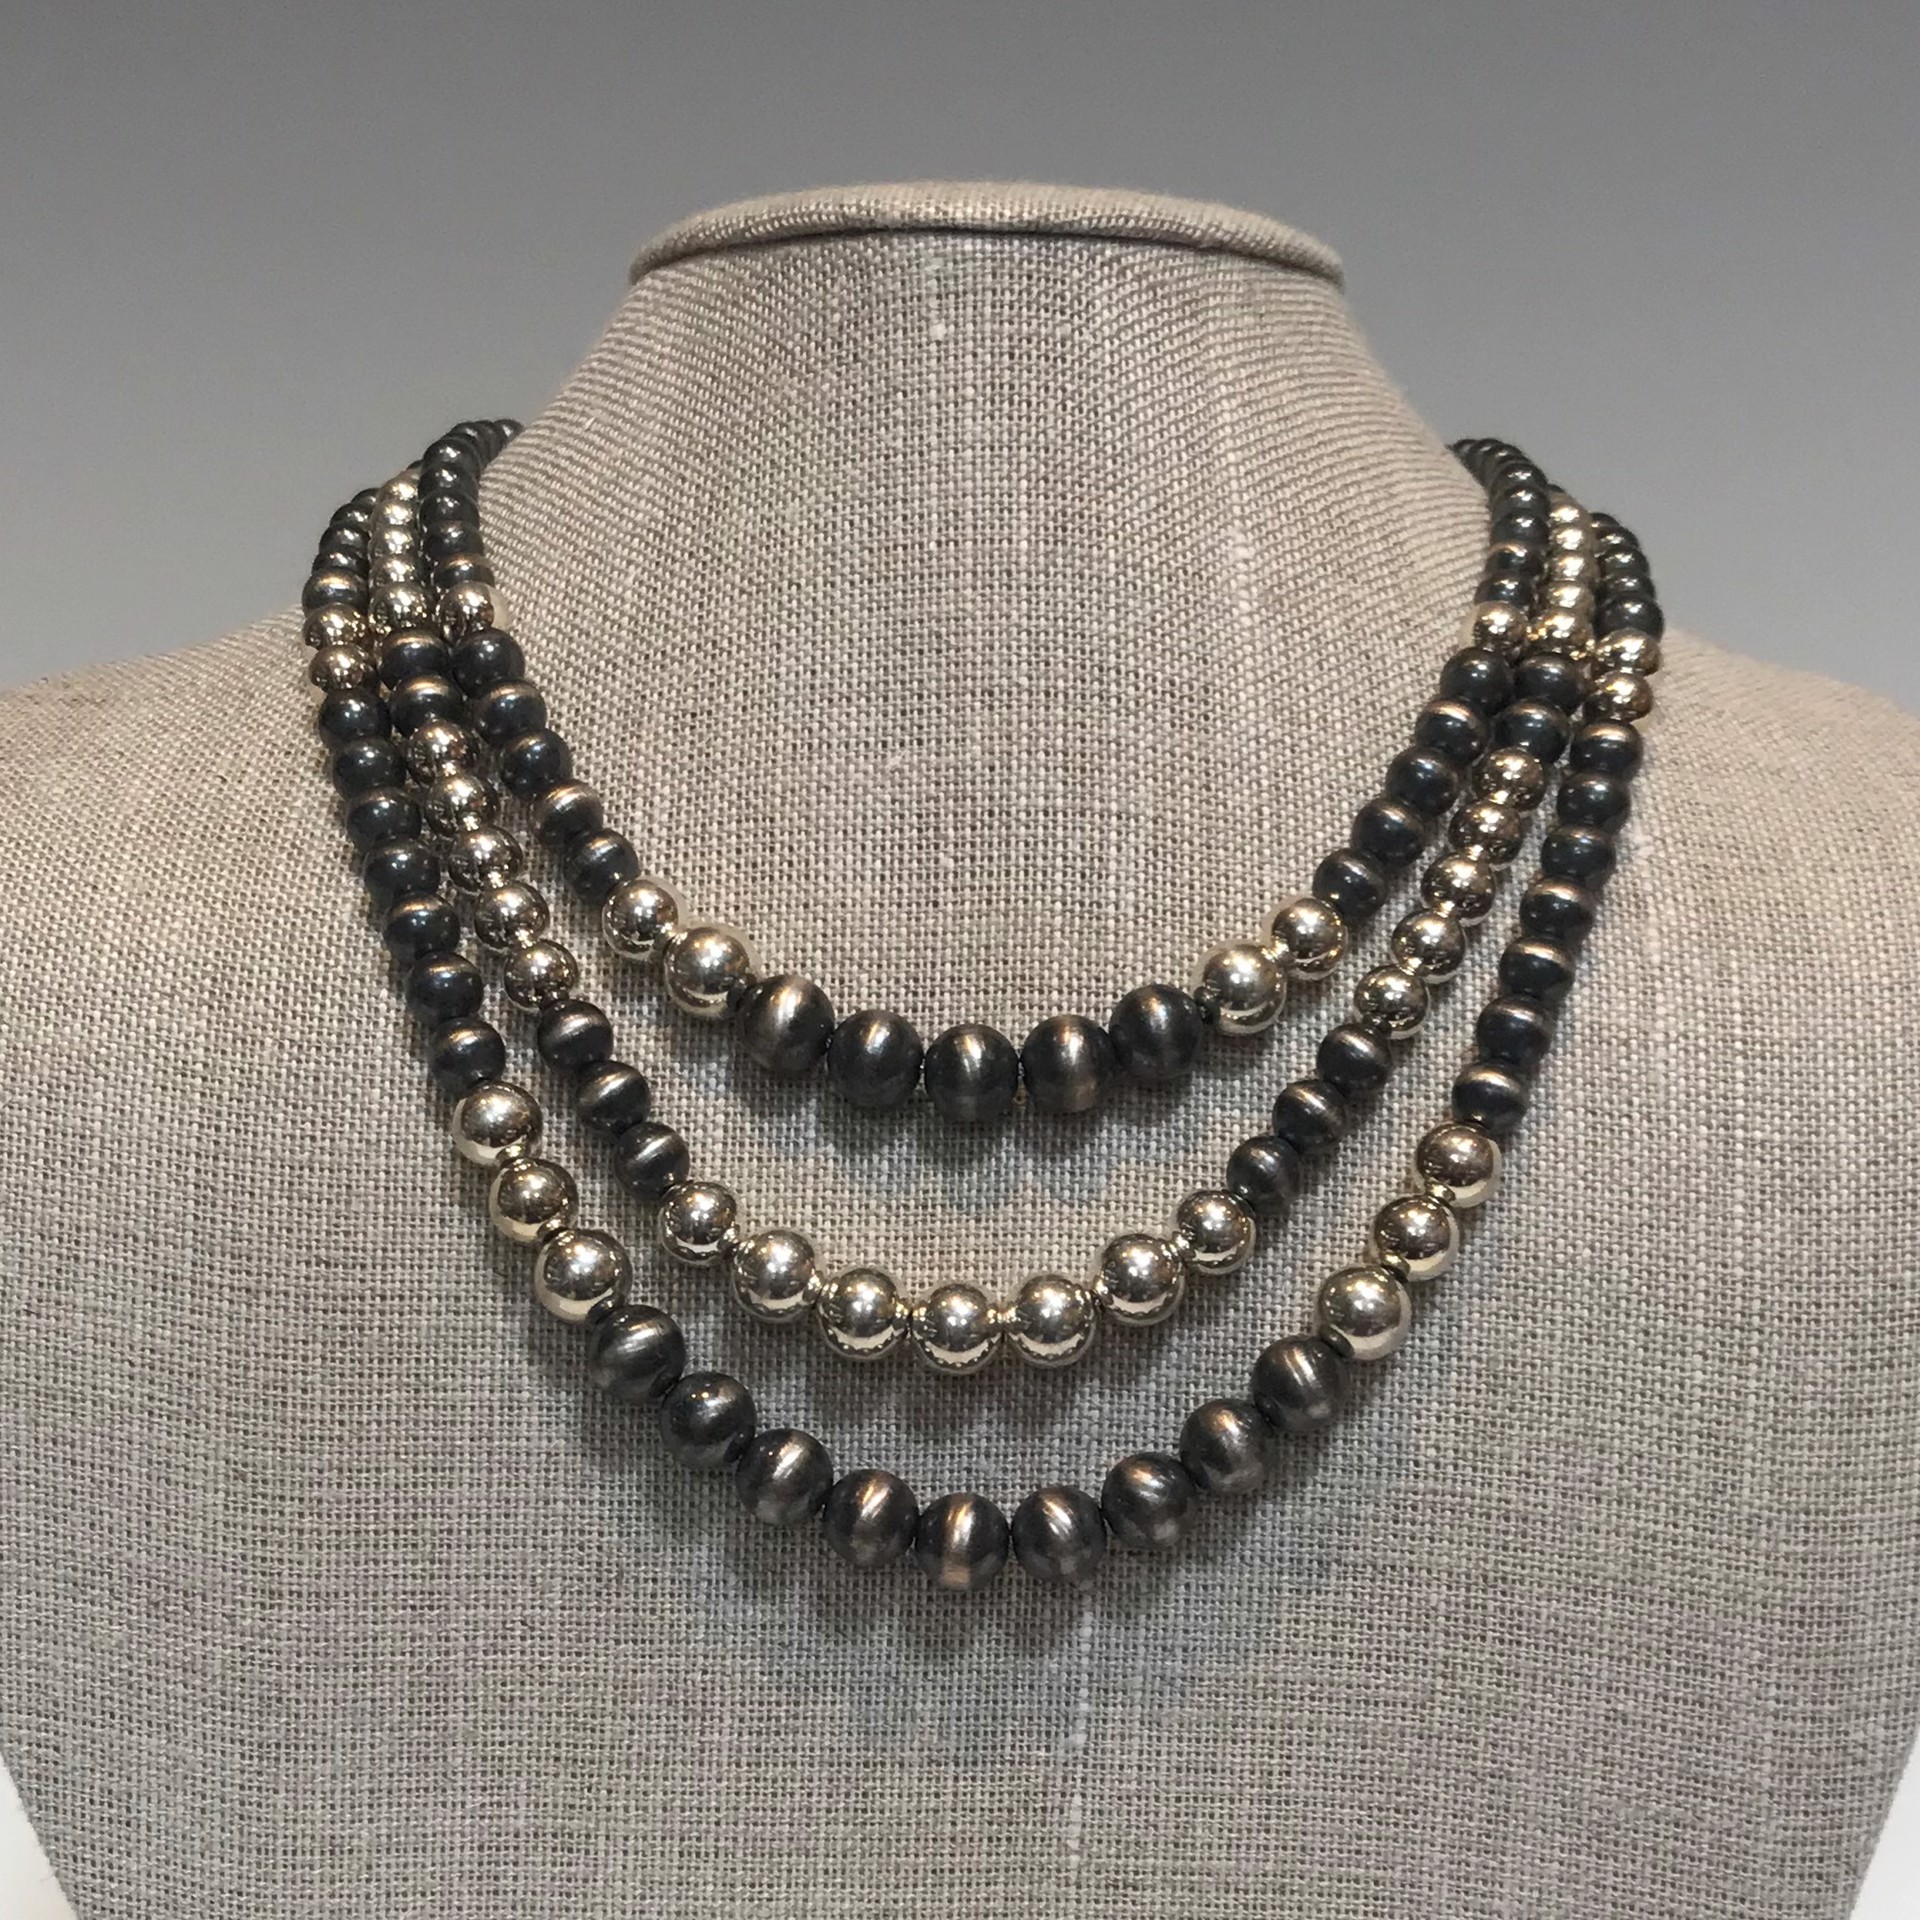 17" Necklace - Triple Strand Oxidized Sterling Silver Beads by Suzanne Woodworth